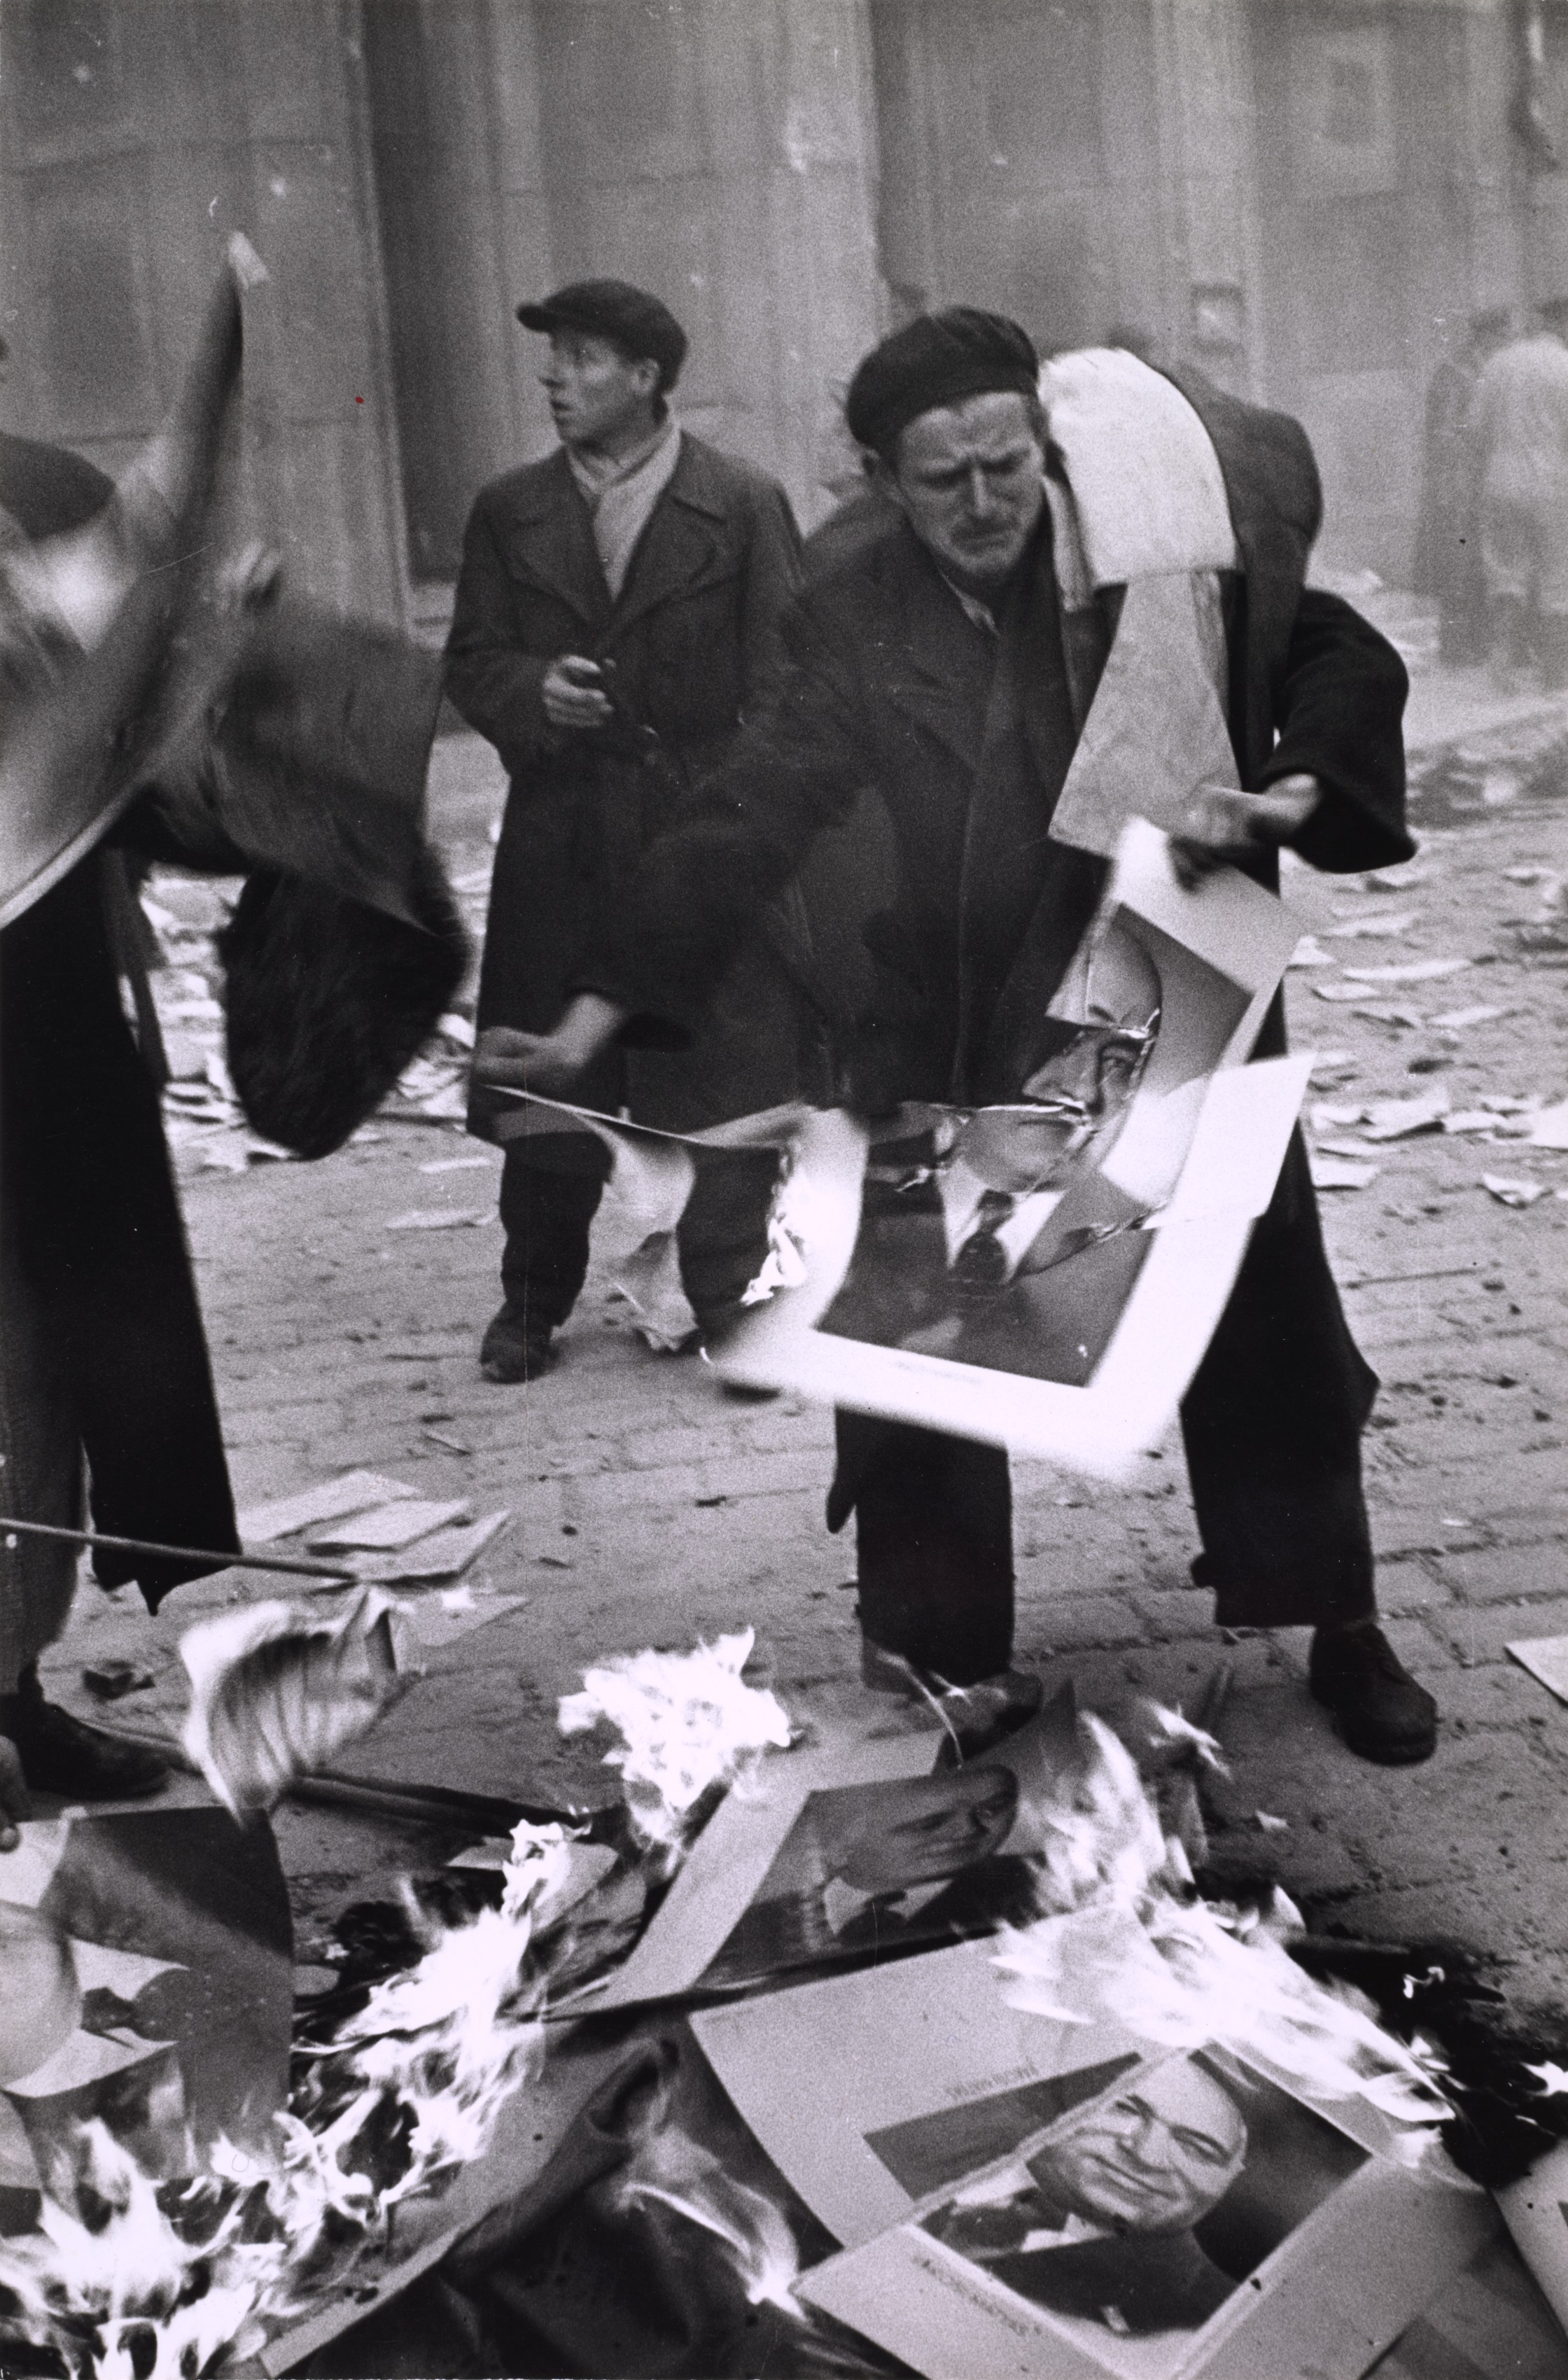 Man burning political posters in the street during revolution, Hungary